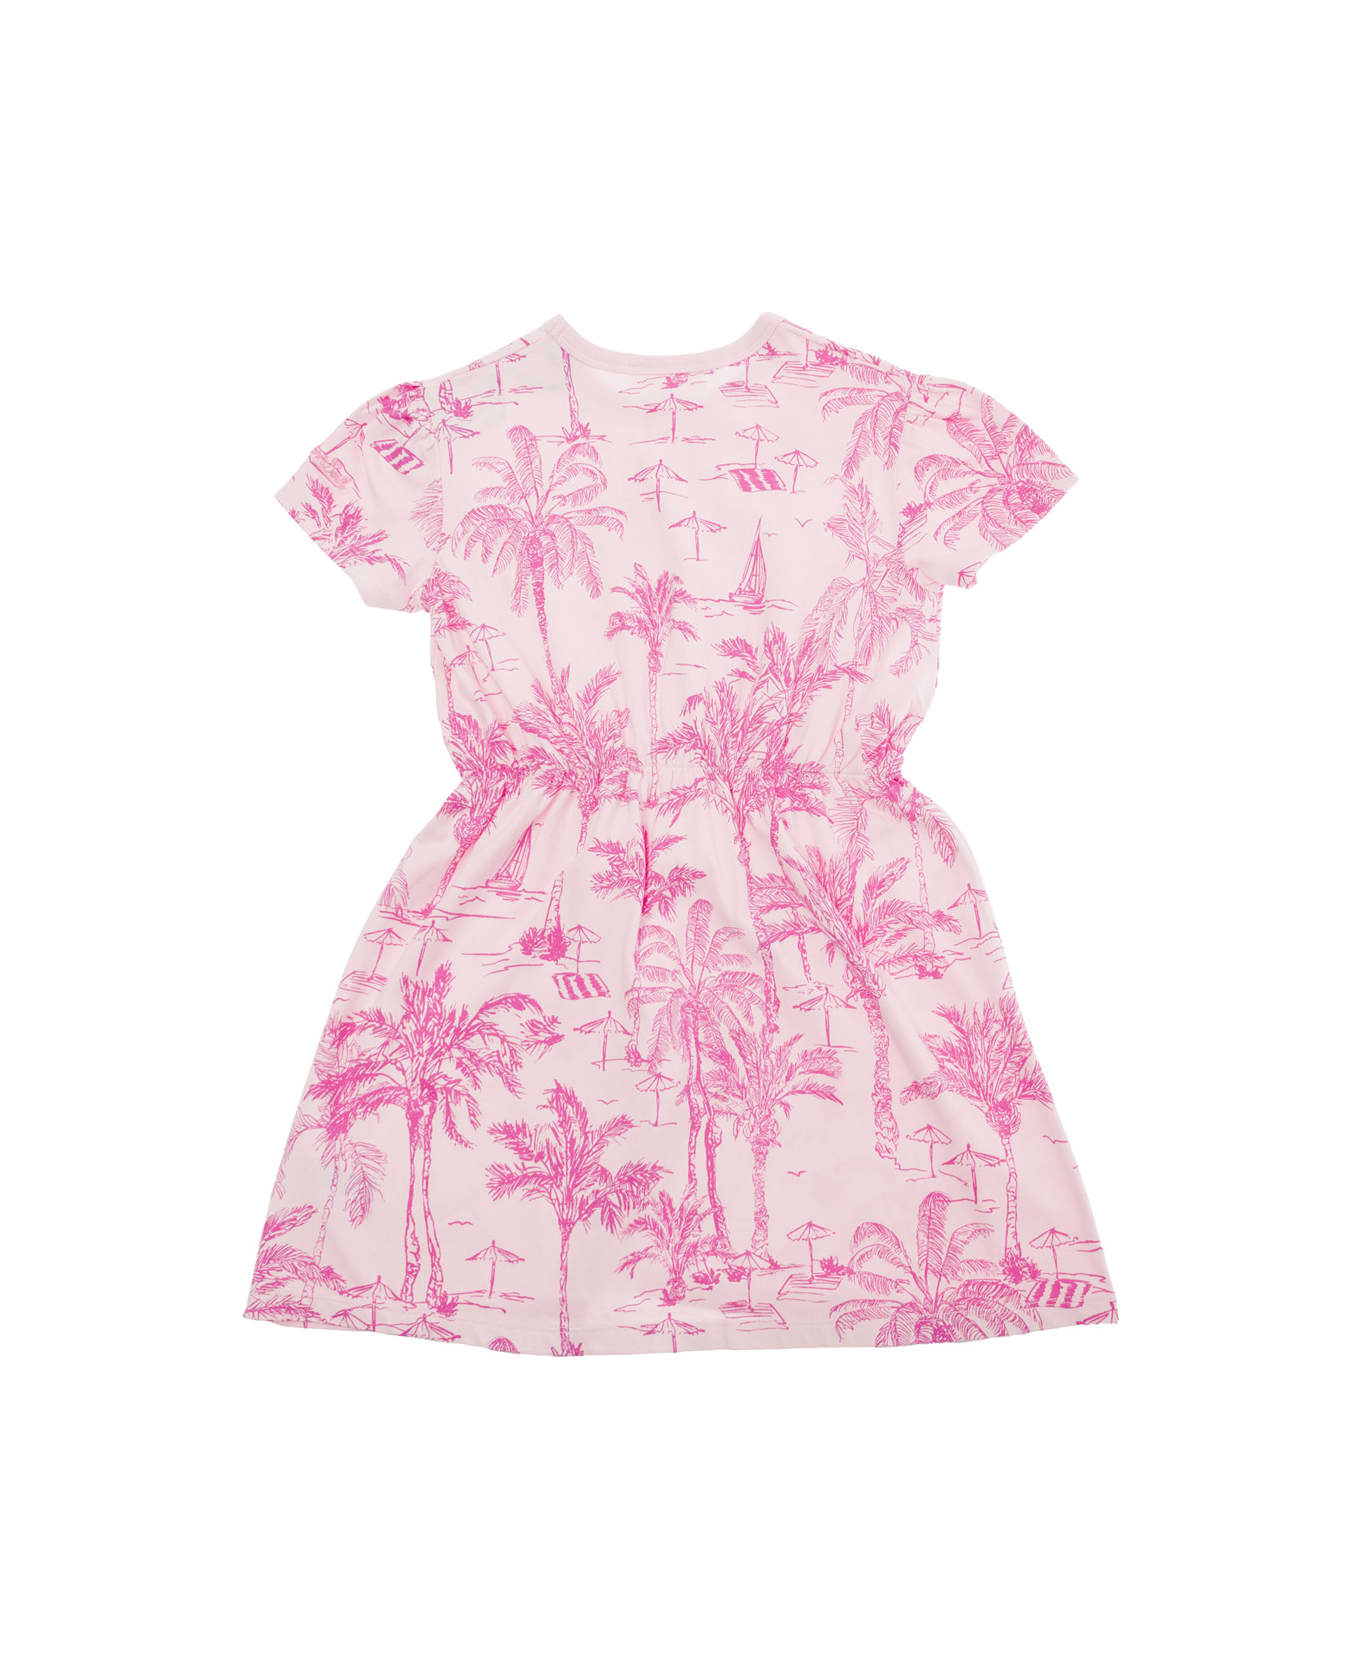 MC2 Saint Barth 'leila' Pink Dress With All-over Palm Print In Cotton Girl - Pink